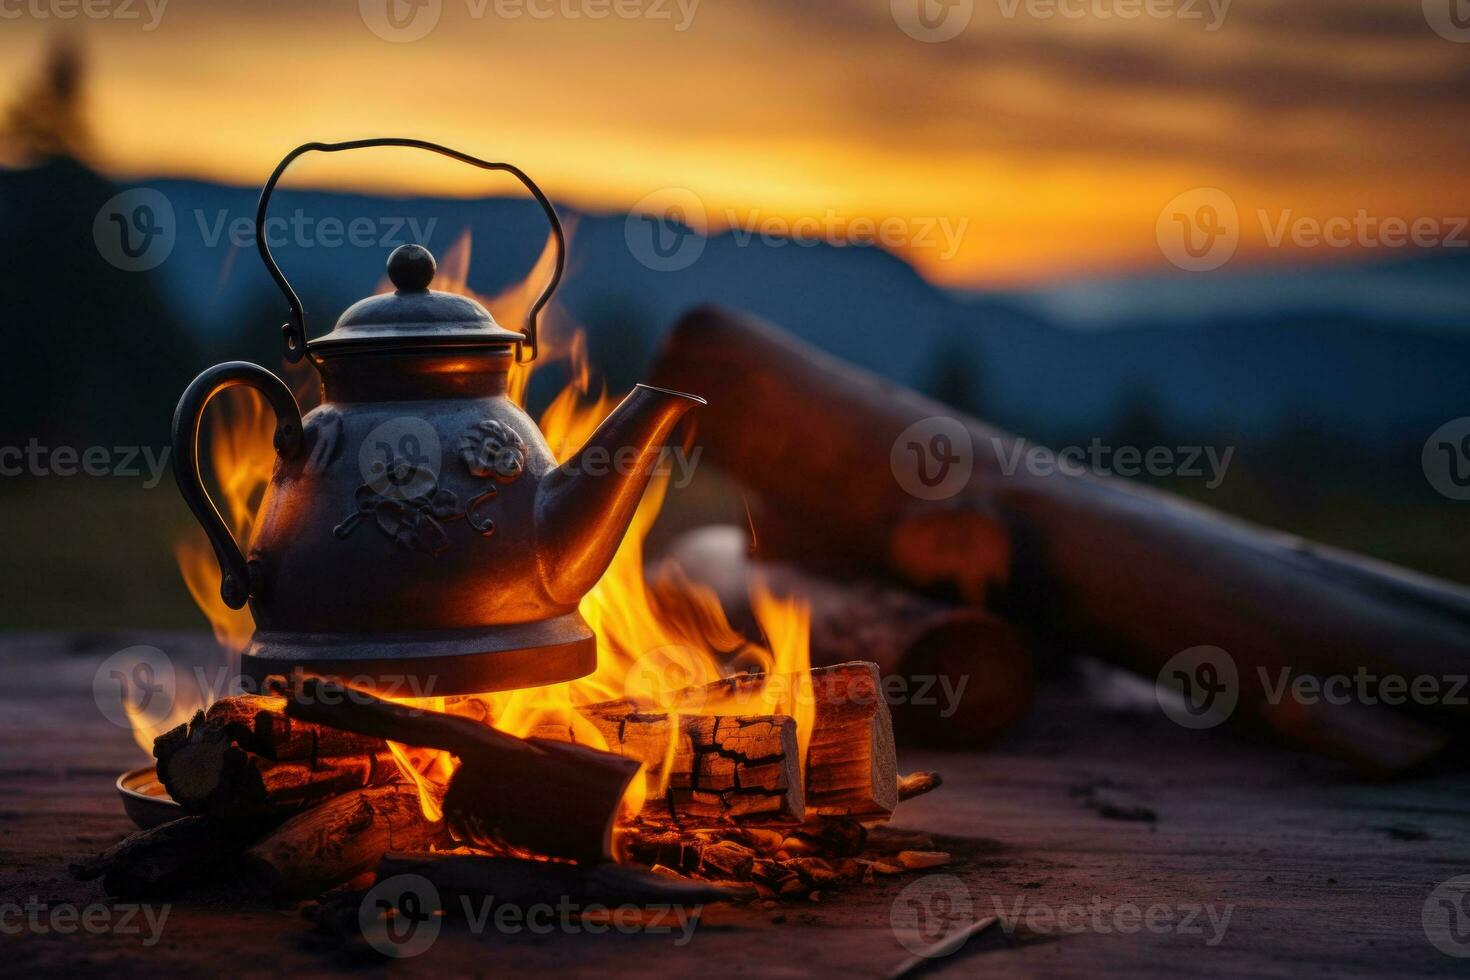 Tea Kettle on Open Fire. Tea in the Camping Stock Image - Image of